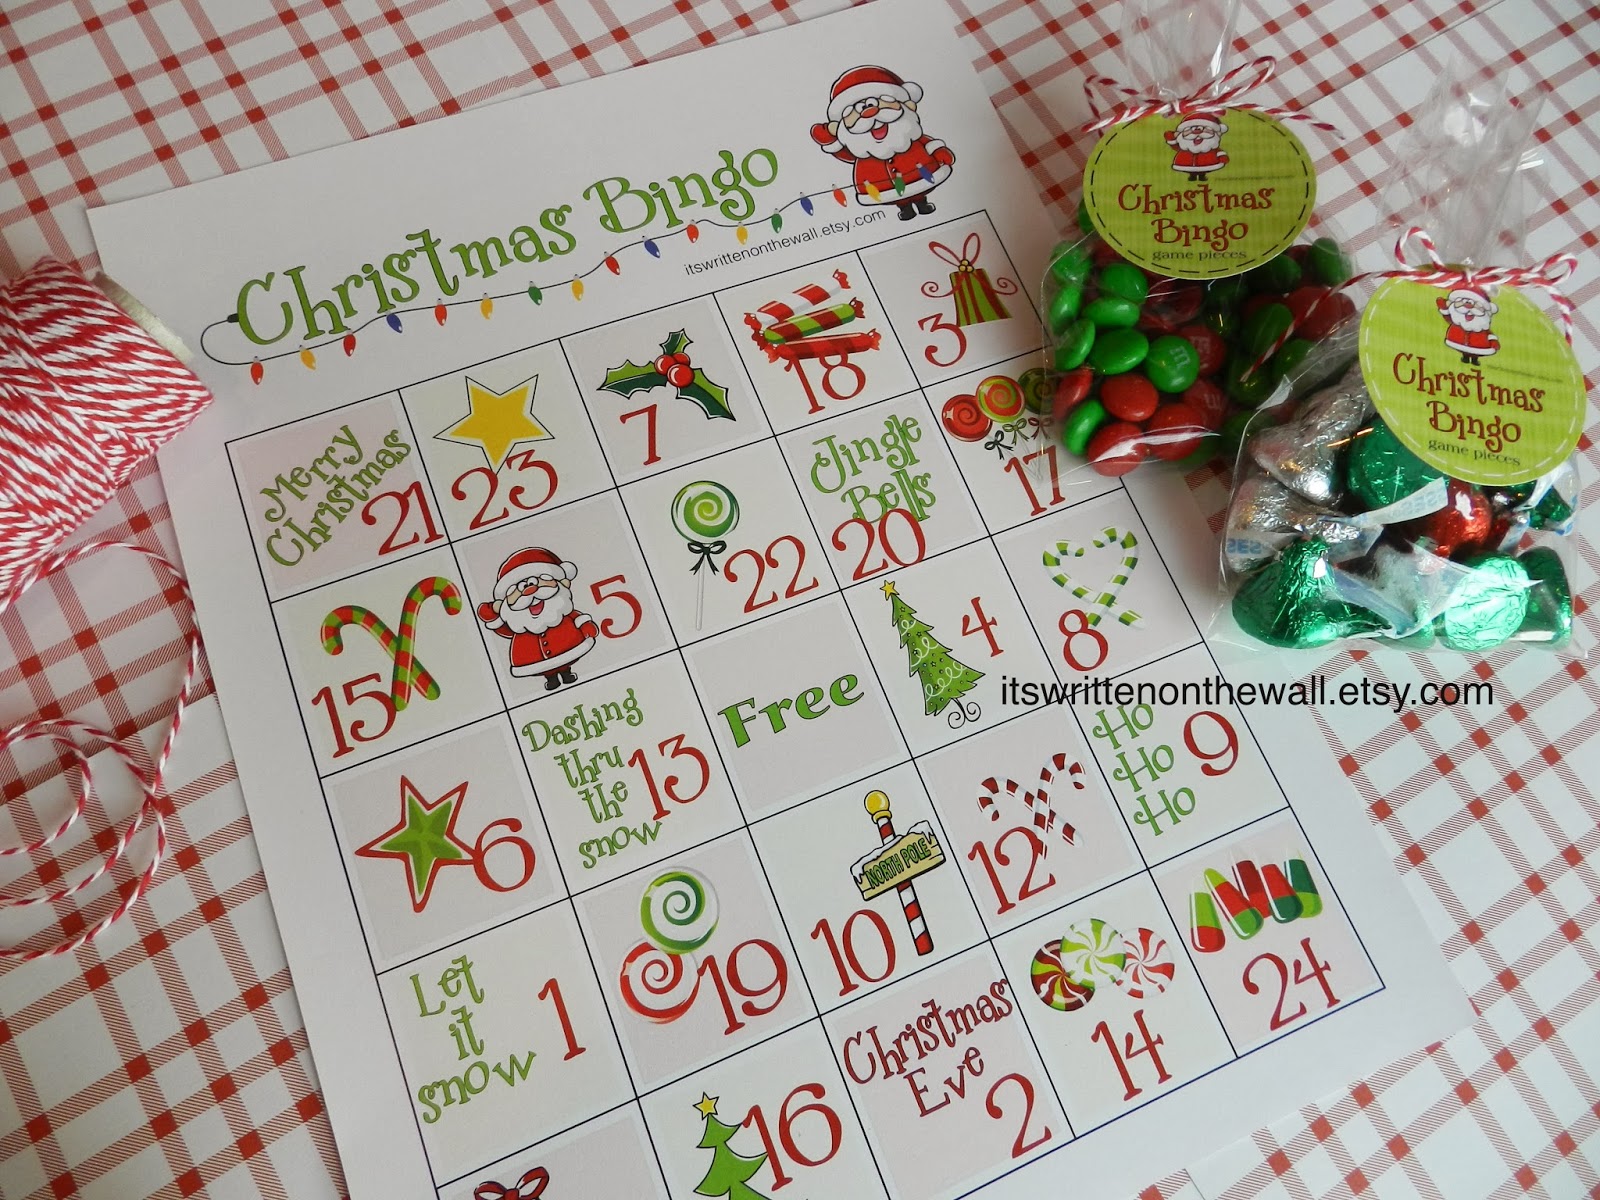 it-s-written-on-the-wall-christmas-bingo-a-fun-game-for-christmas-parties-at-home-or-school